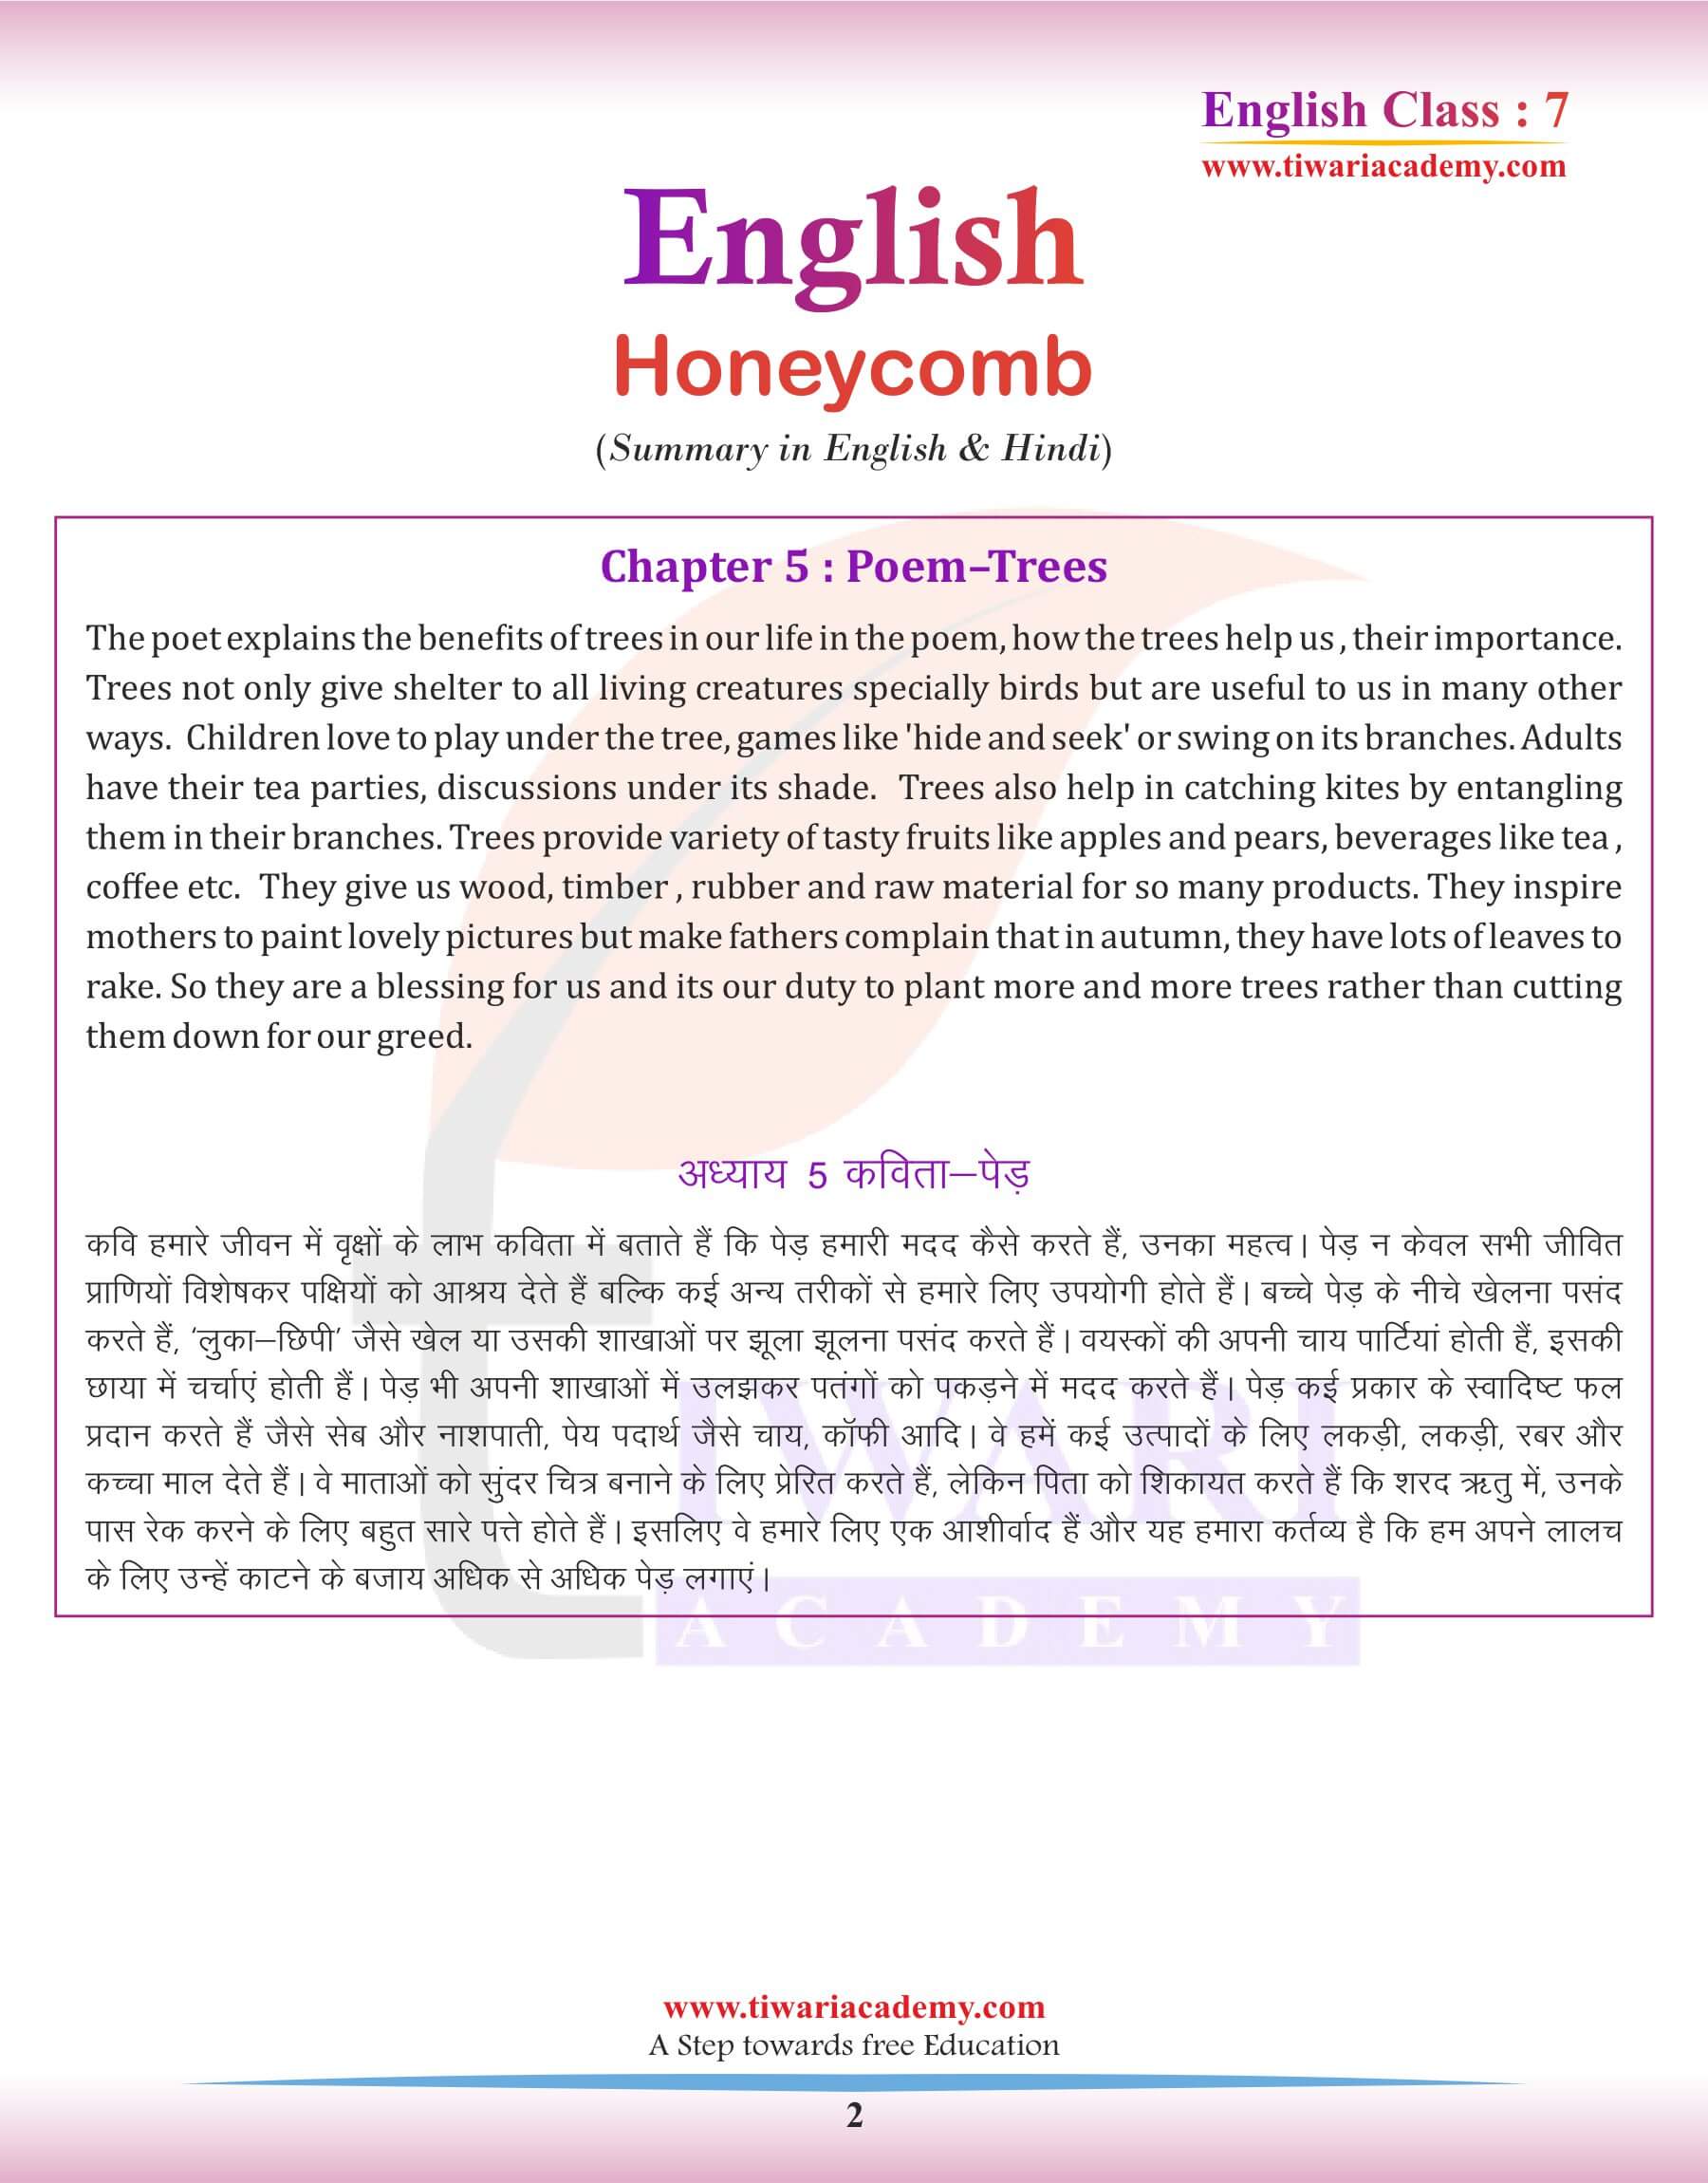 Class 7 English Chapter 5 Summary of Poem